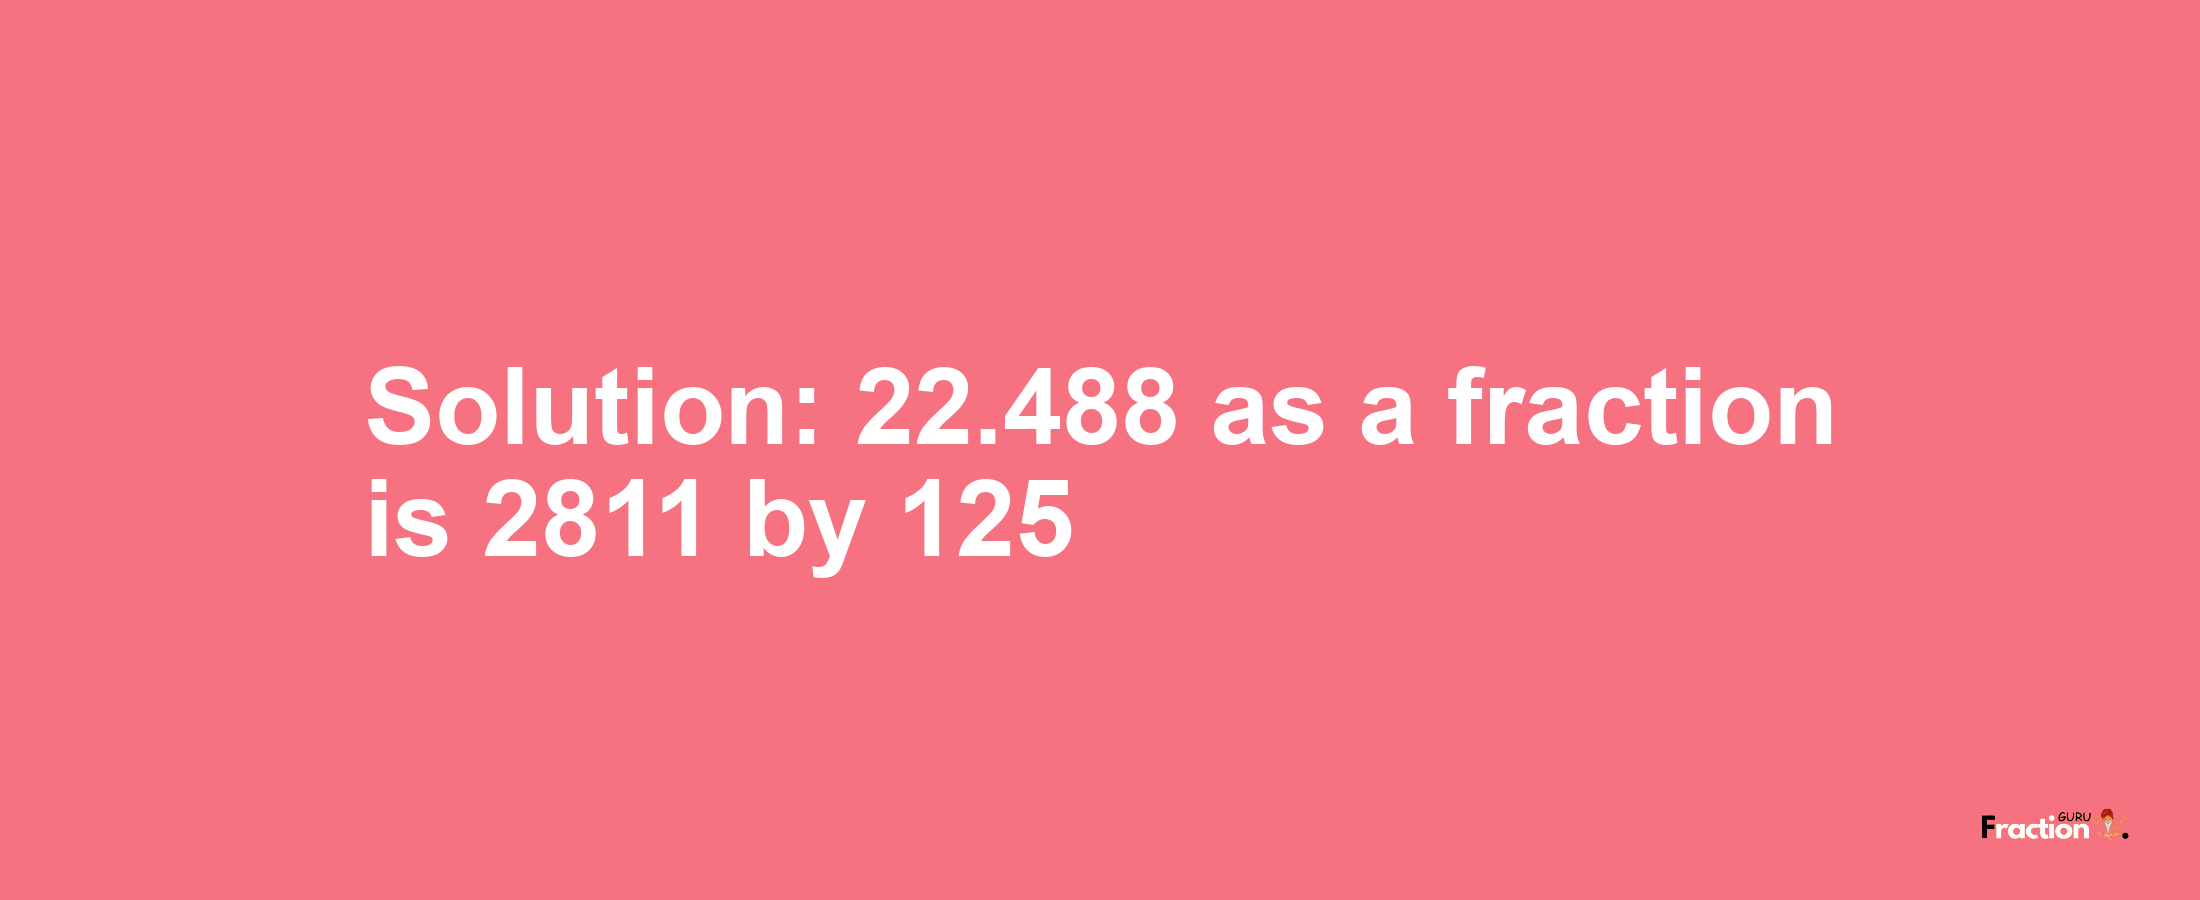 Solution:22.488 as a fraction is 2811/125